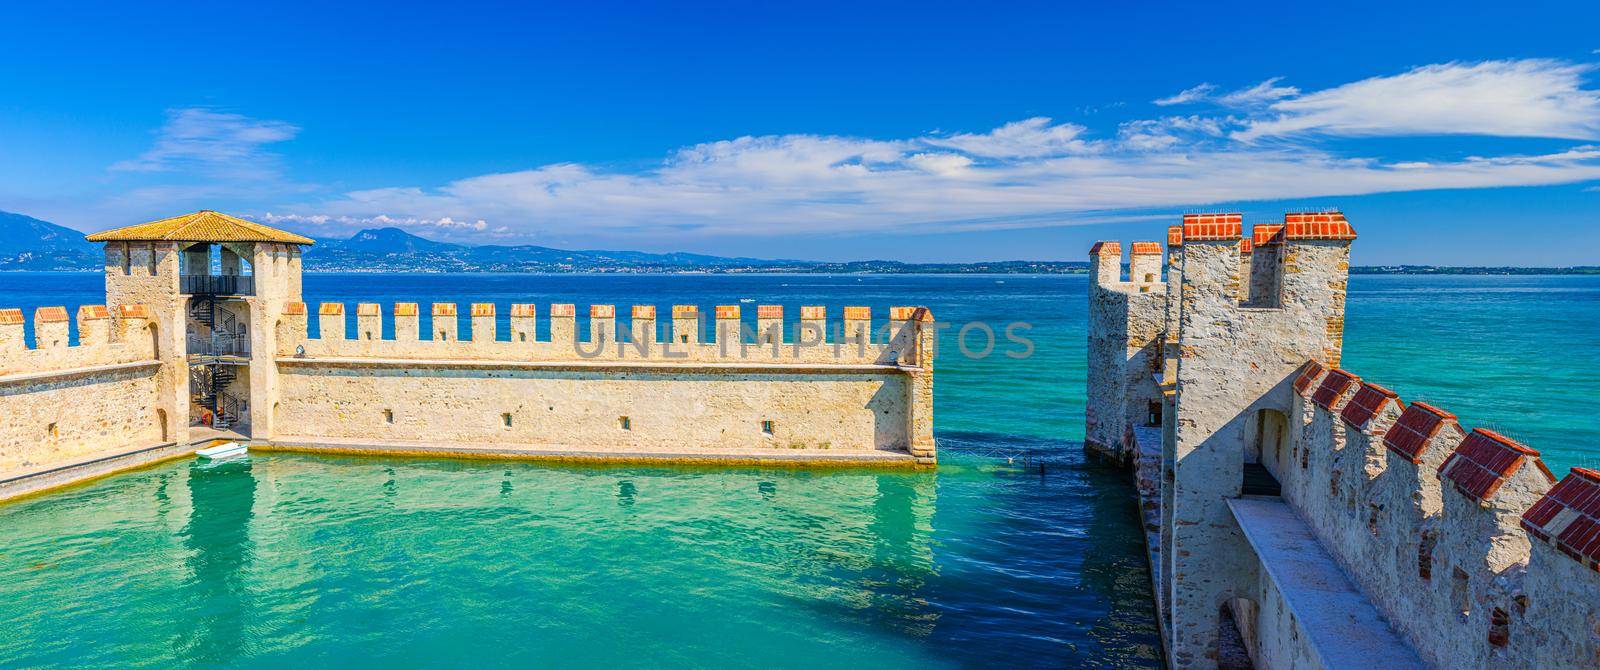 Sirmione, Italy, September 11, 2019: Small fortified harbor with turquoise water, Scaligero Castle Castello fortress, town on Garda lake, medieval castle with stone towers and brick walls, Lombardy